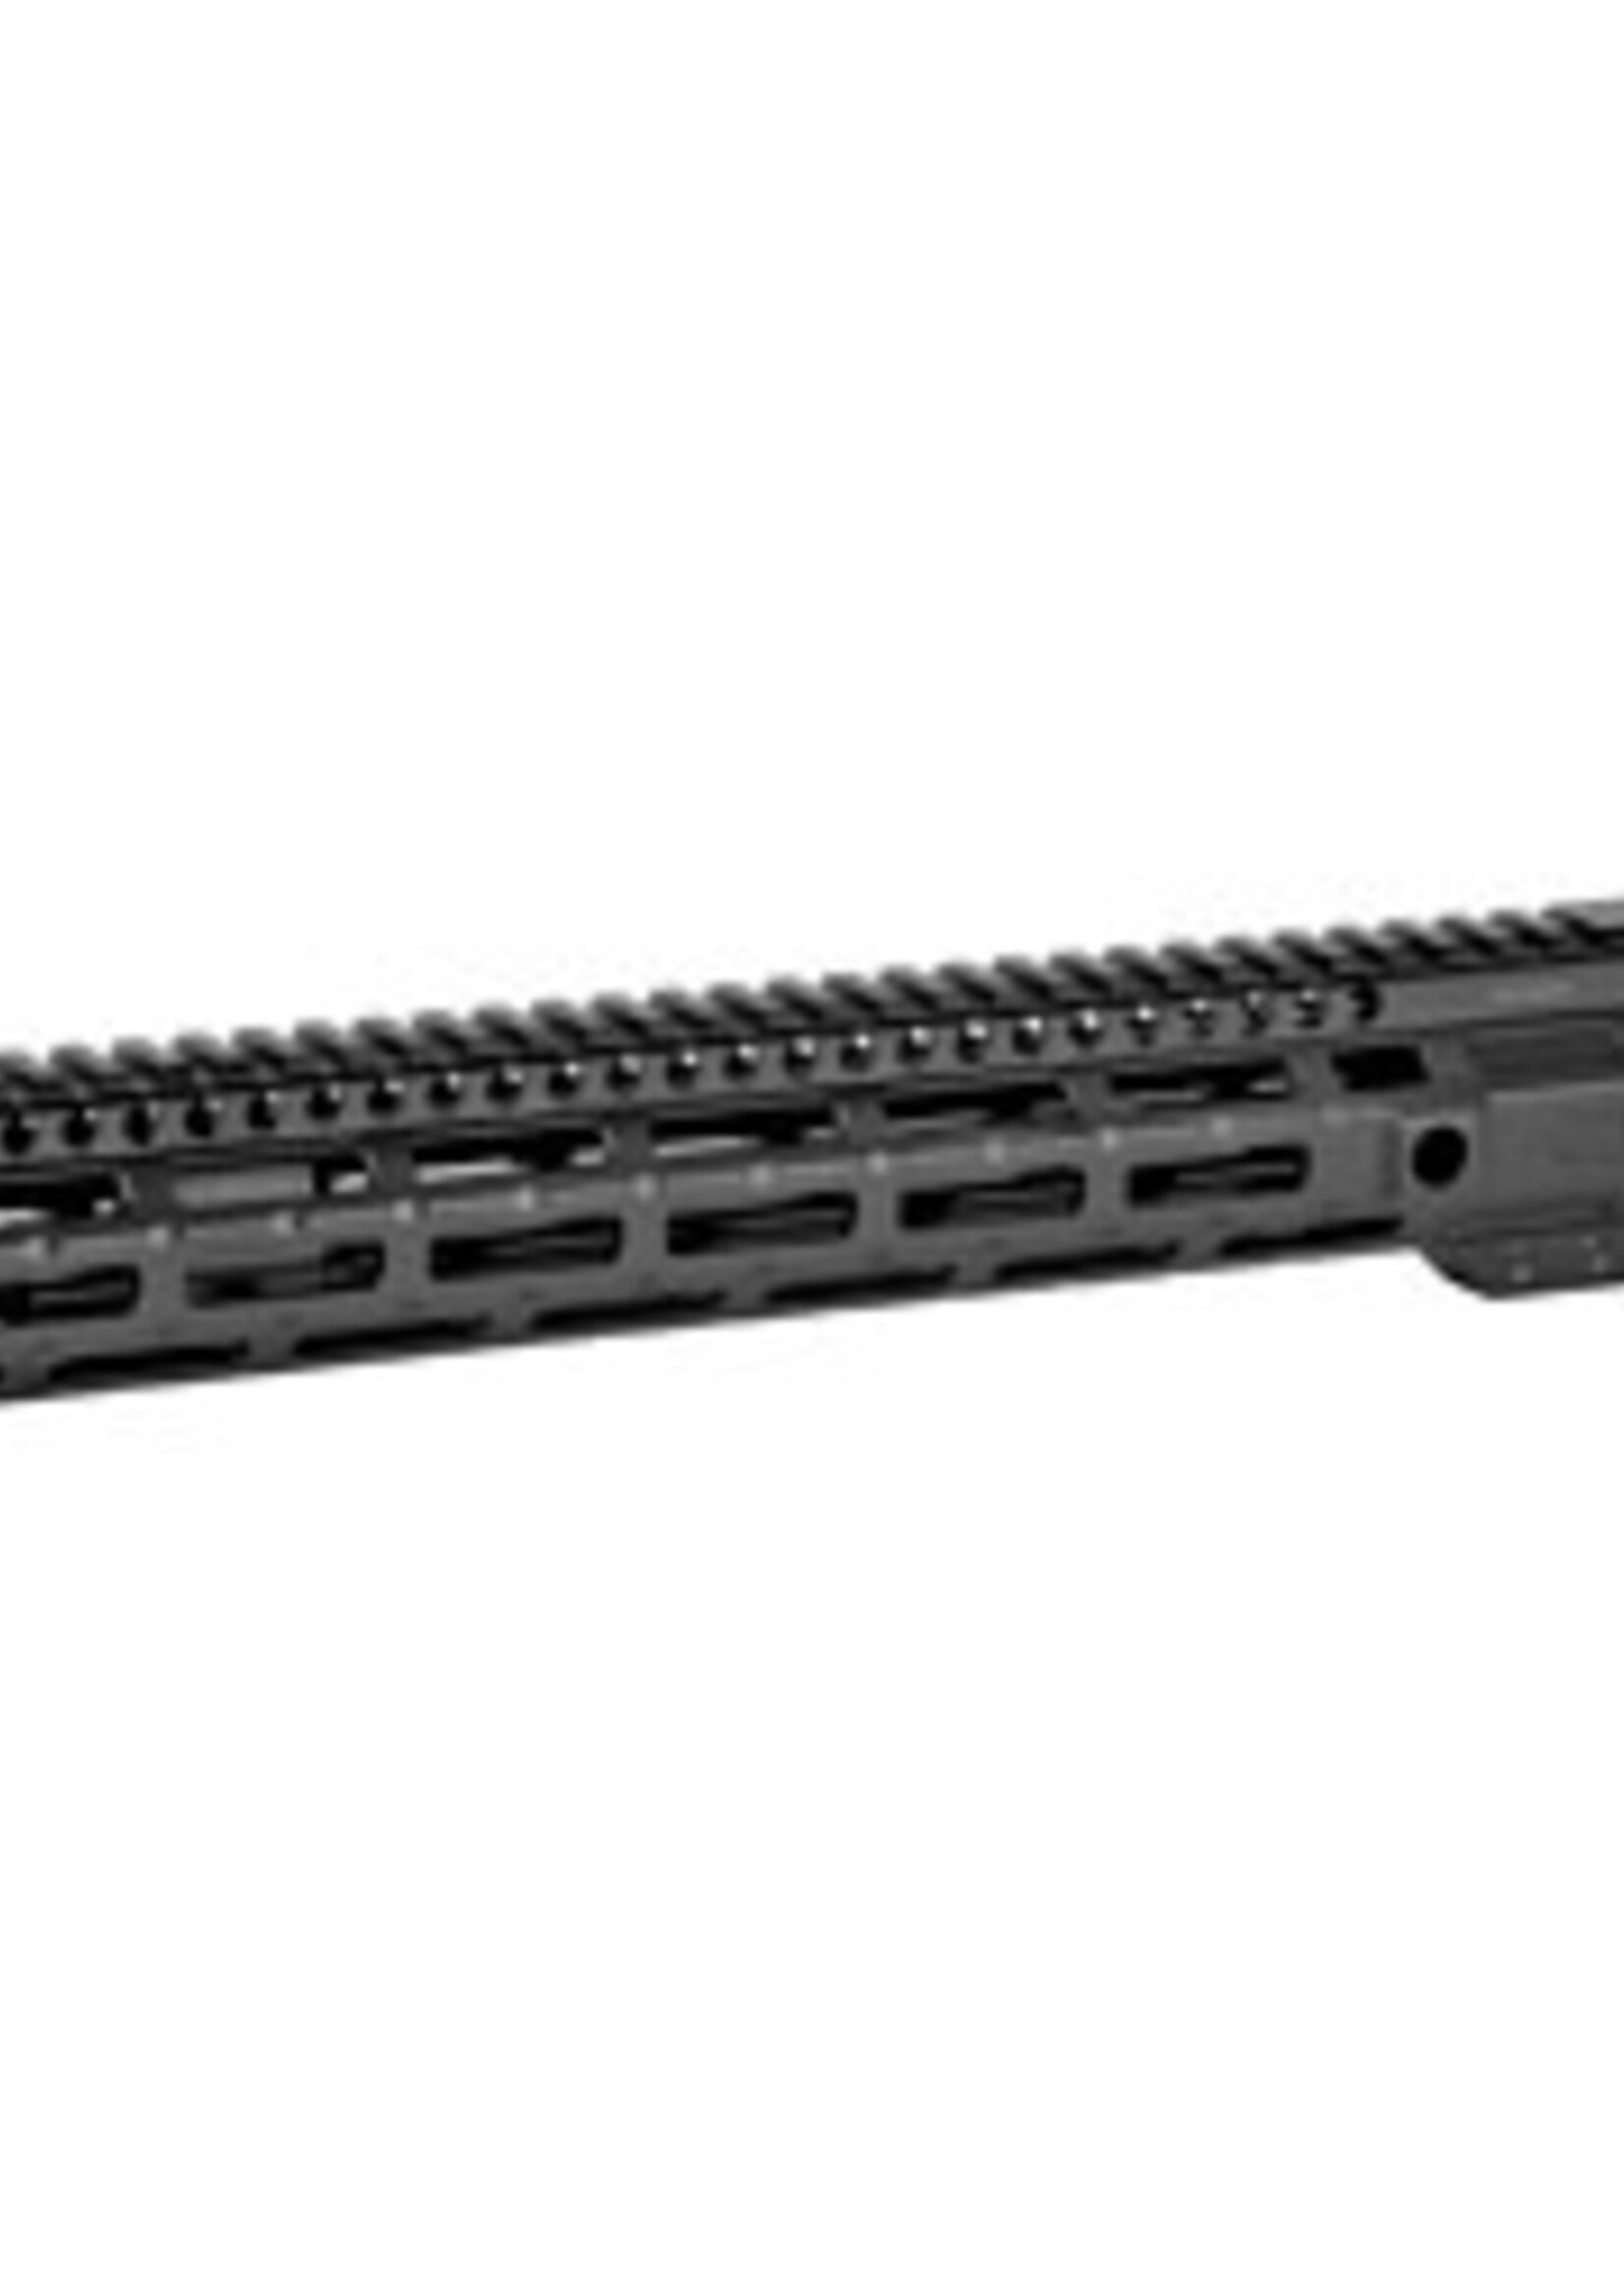 Midwest INdustries Midwest Industries, Upper, 223 Wylde, 16" Lightweight Barrel, Black, 14" MLOK Handguard, Fits AR15, BCG and Charging Handle NOT Included